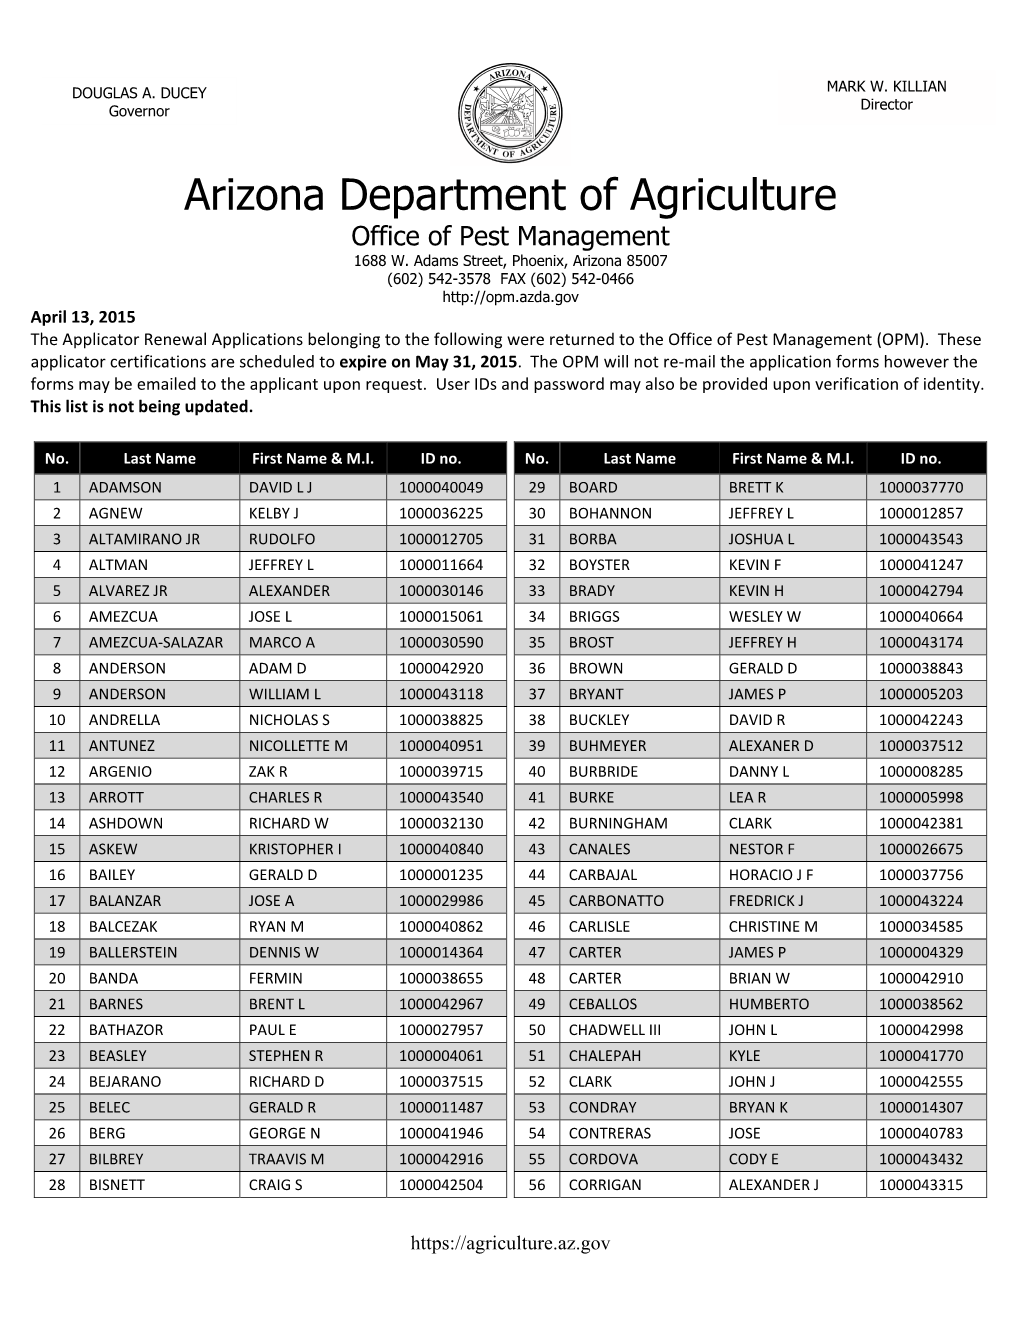 Arizona Department of Agriculture Office of Pest Management 1688 W